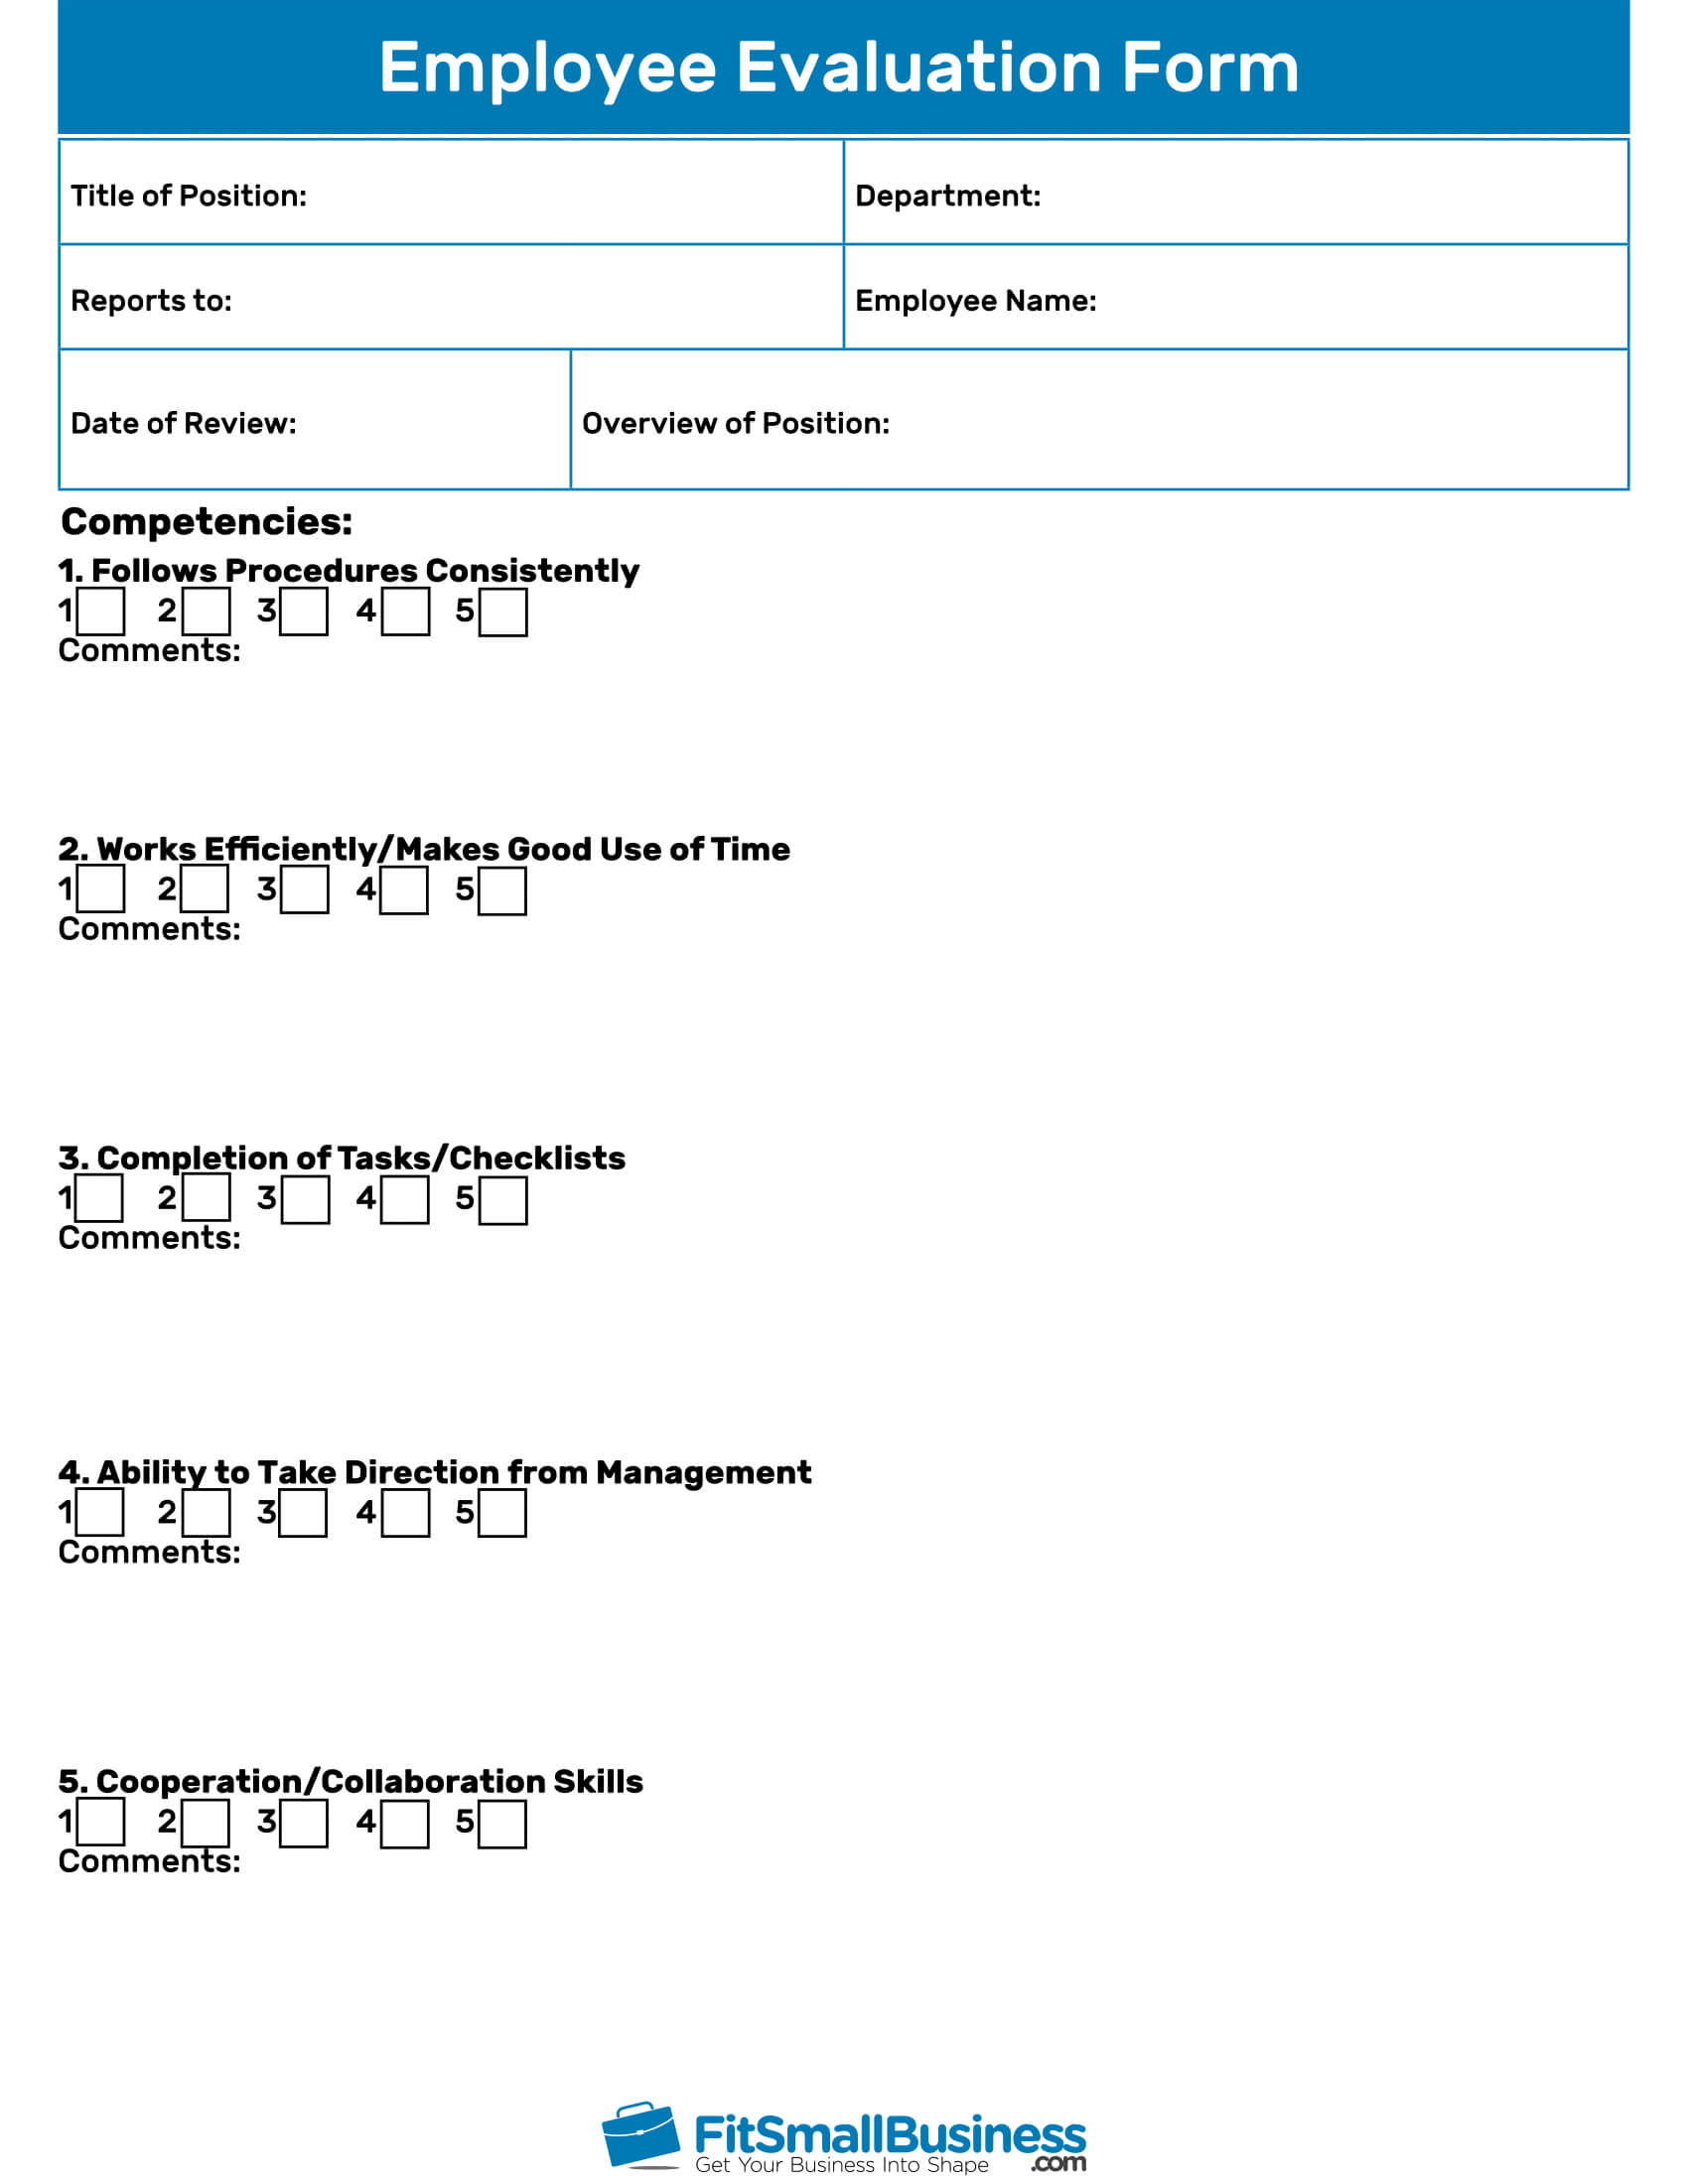 Employee Evaluation Forms [+Free Performance Review Templates] With Blank Evaluation Form Template